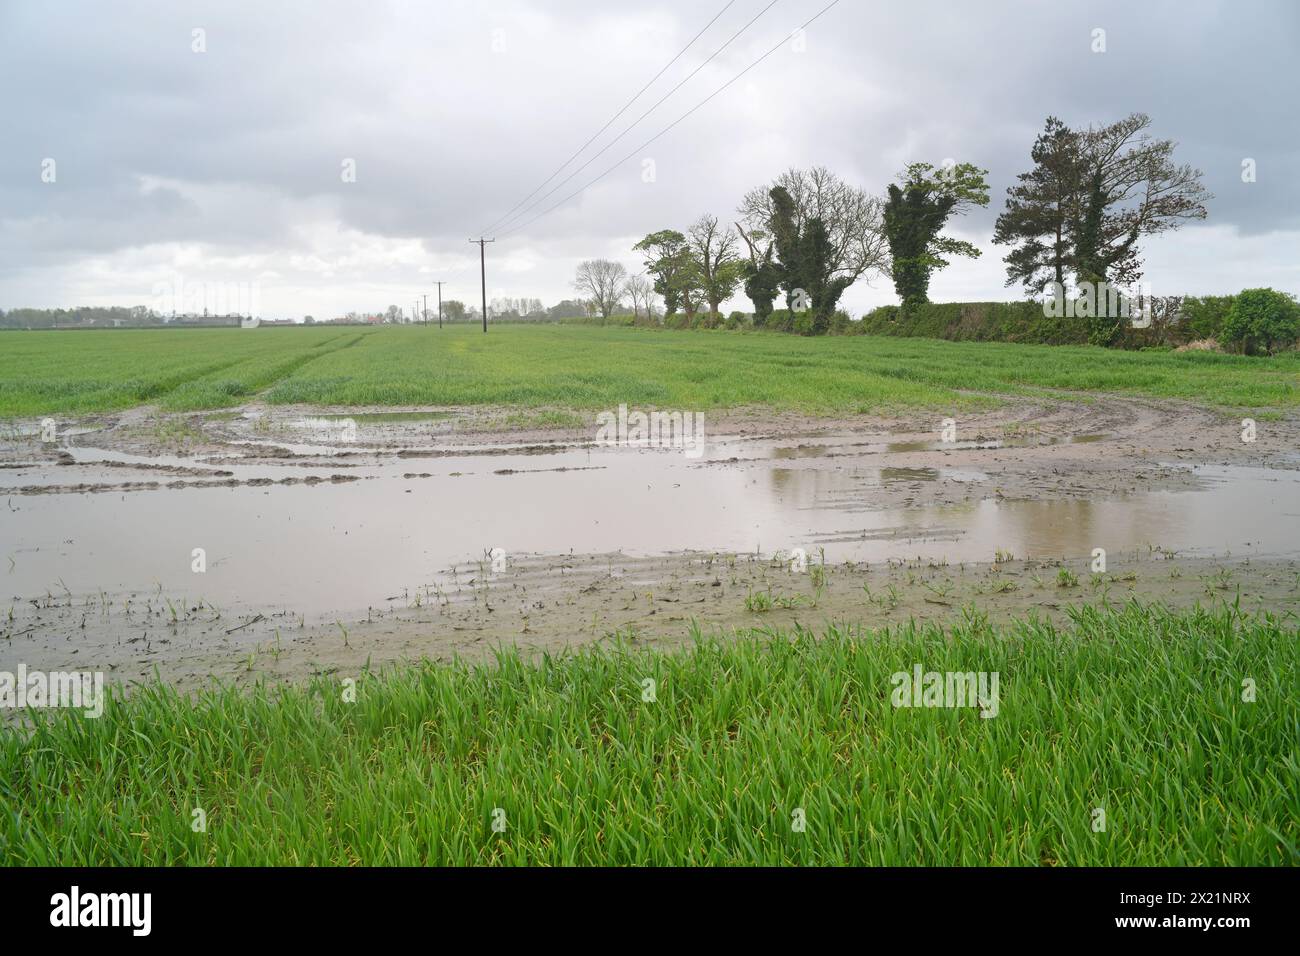 flooded crops in farmers field during heavy rainfall york yorkshire united kingdom Stock Photo